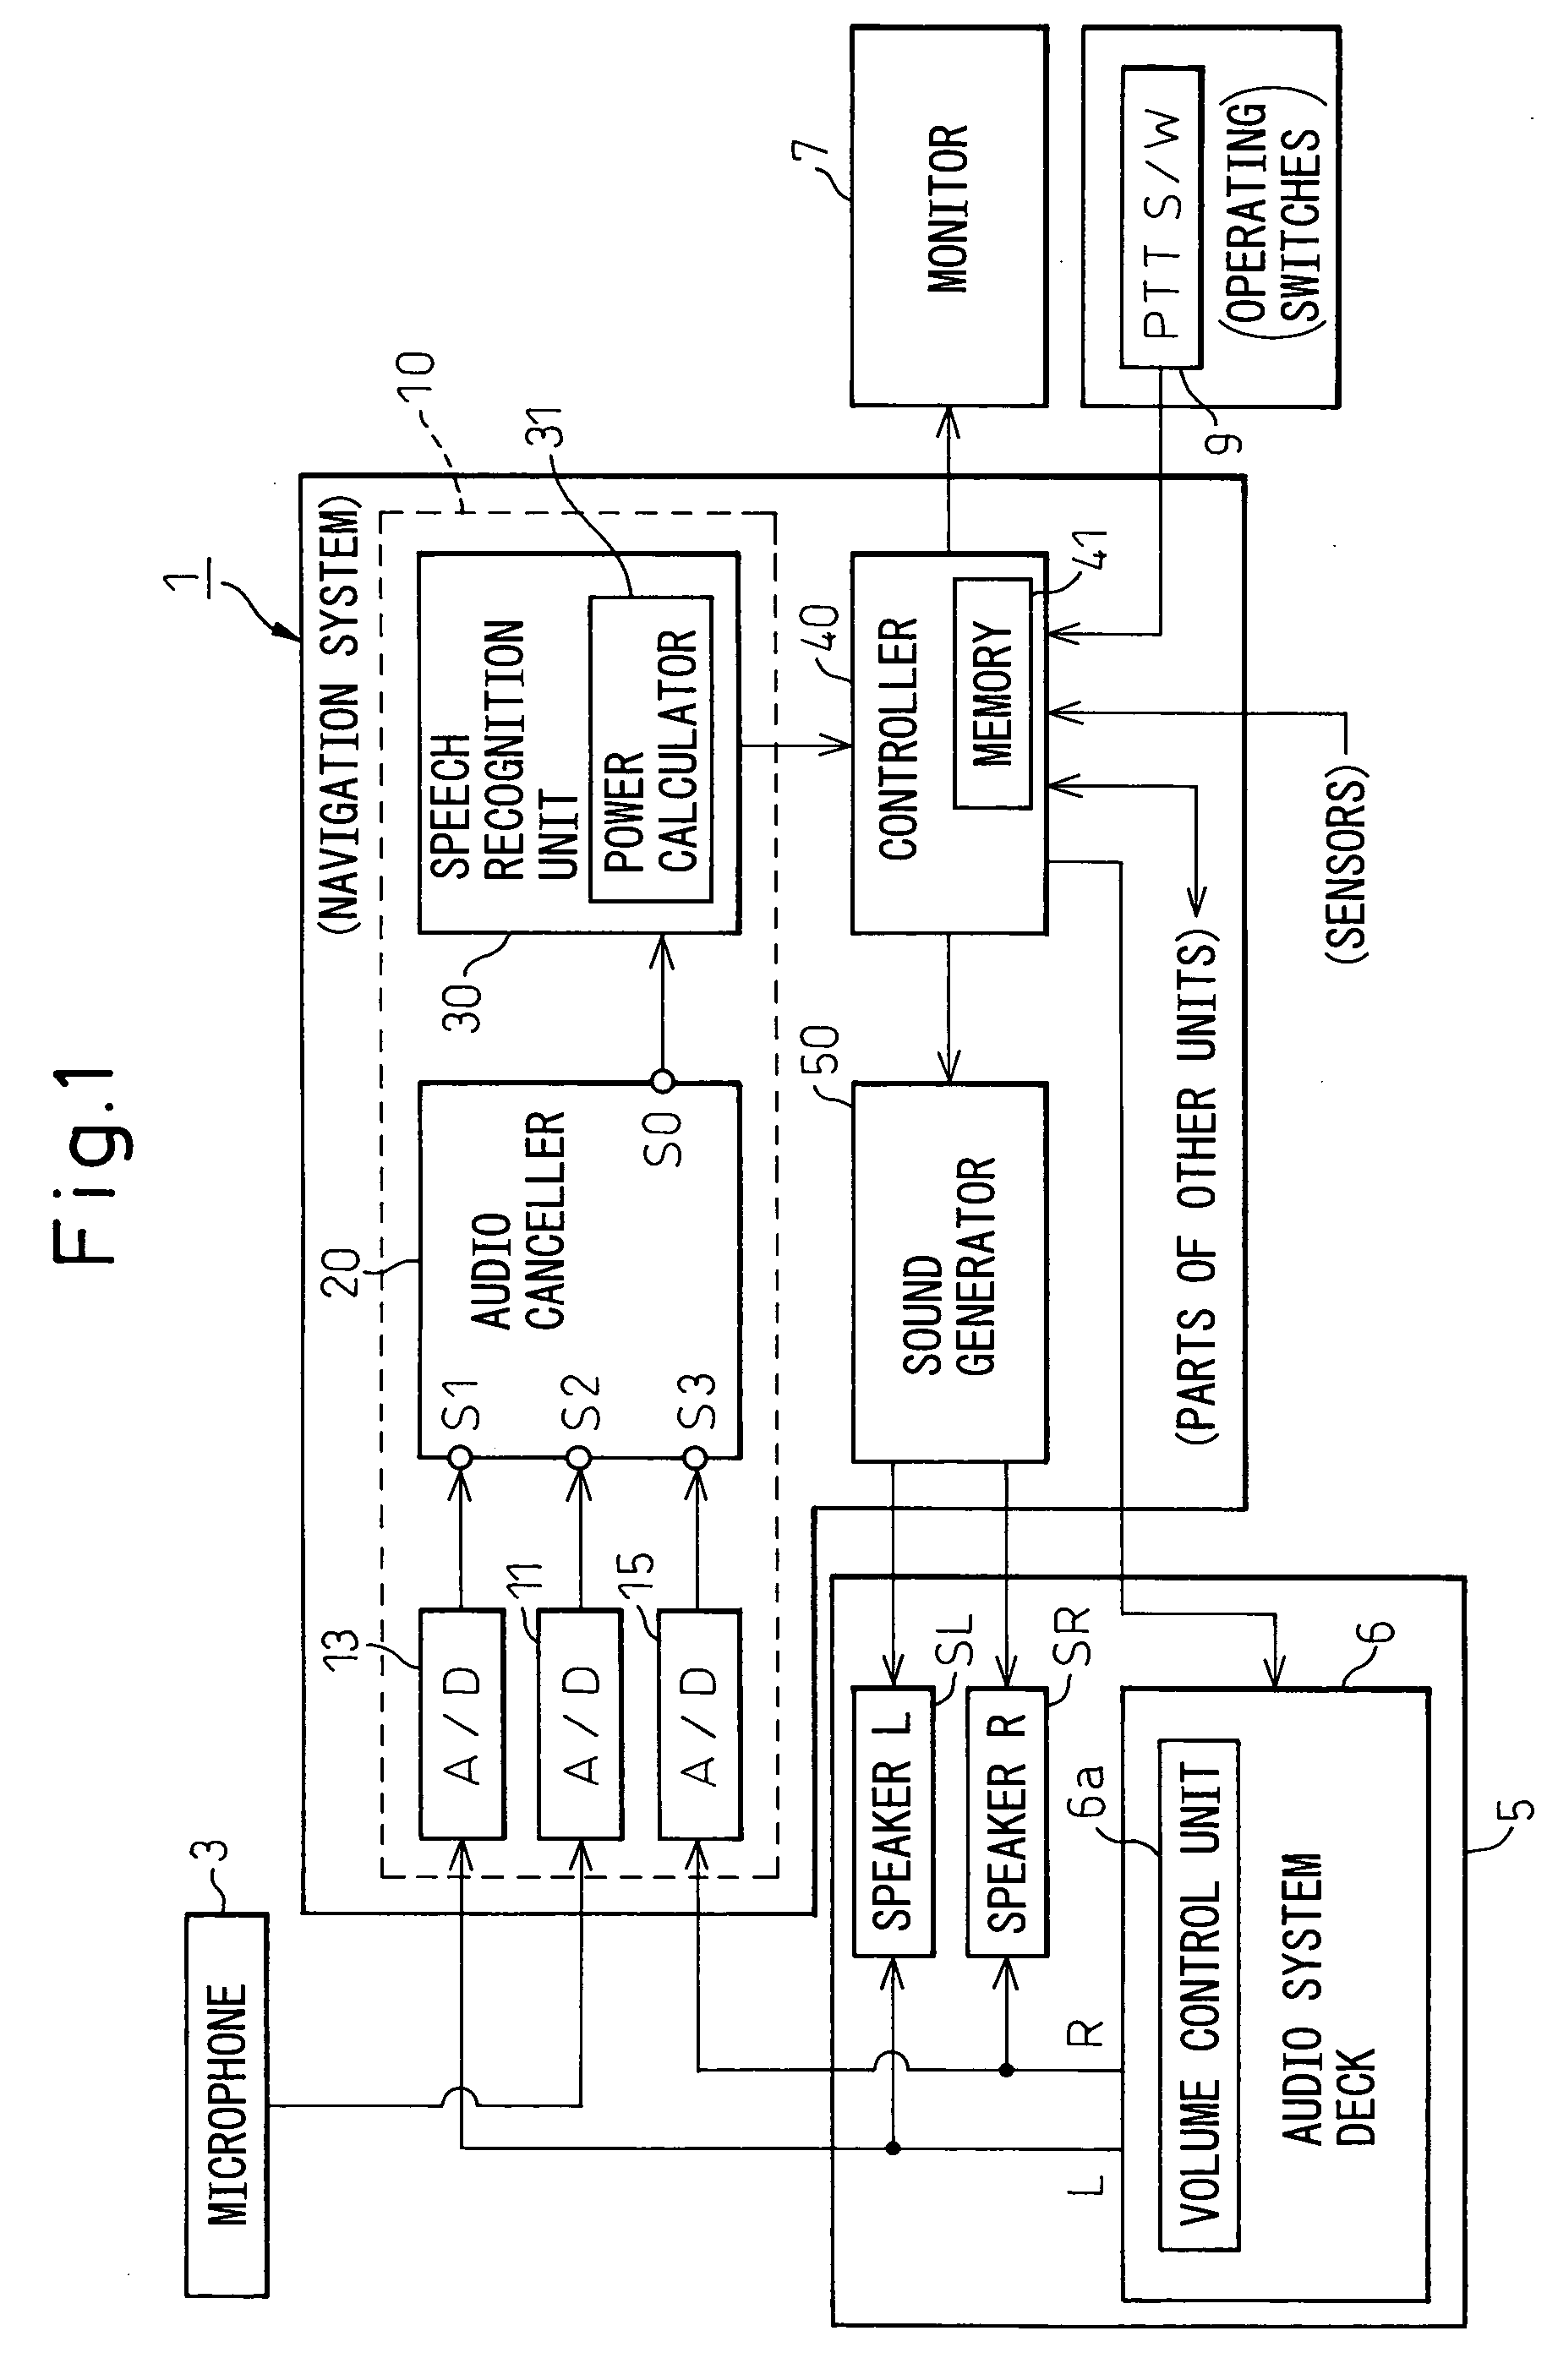 Noise cancellation system, speech recognition system, and car navigation system